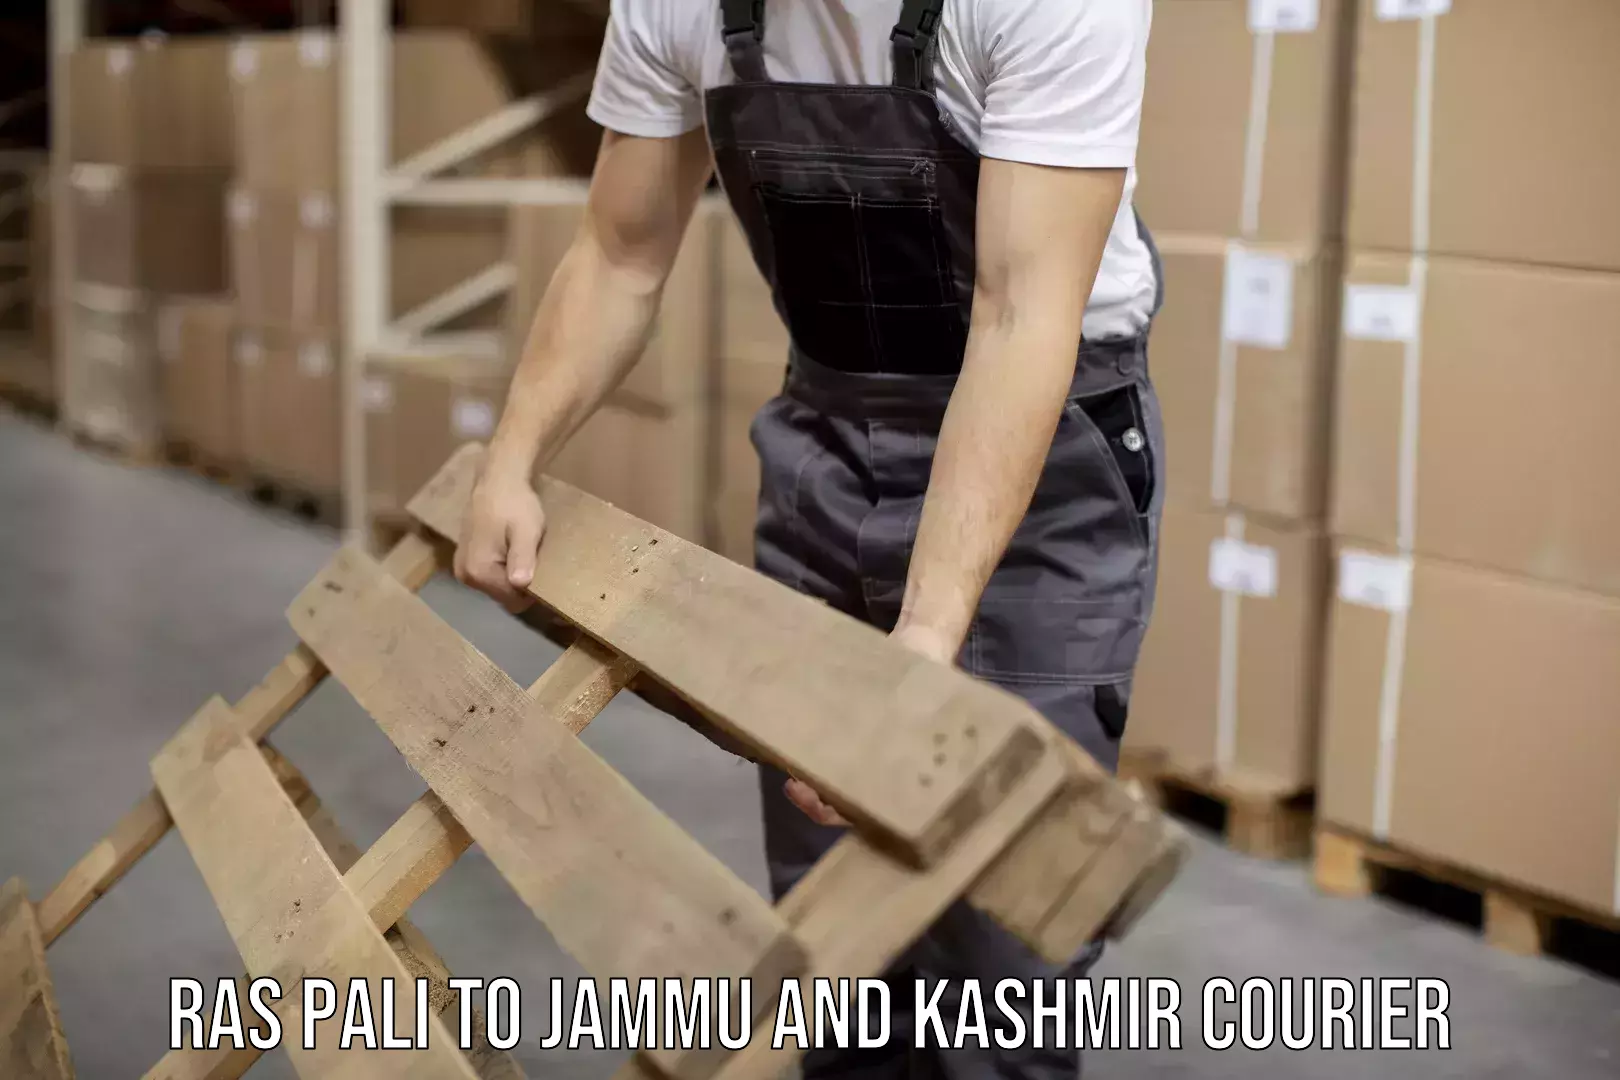 Next-day freight services in Ras Pali to Jammu and Kashmir